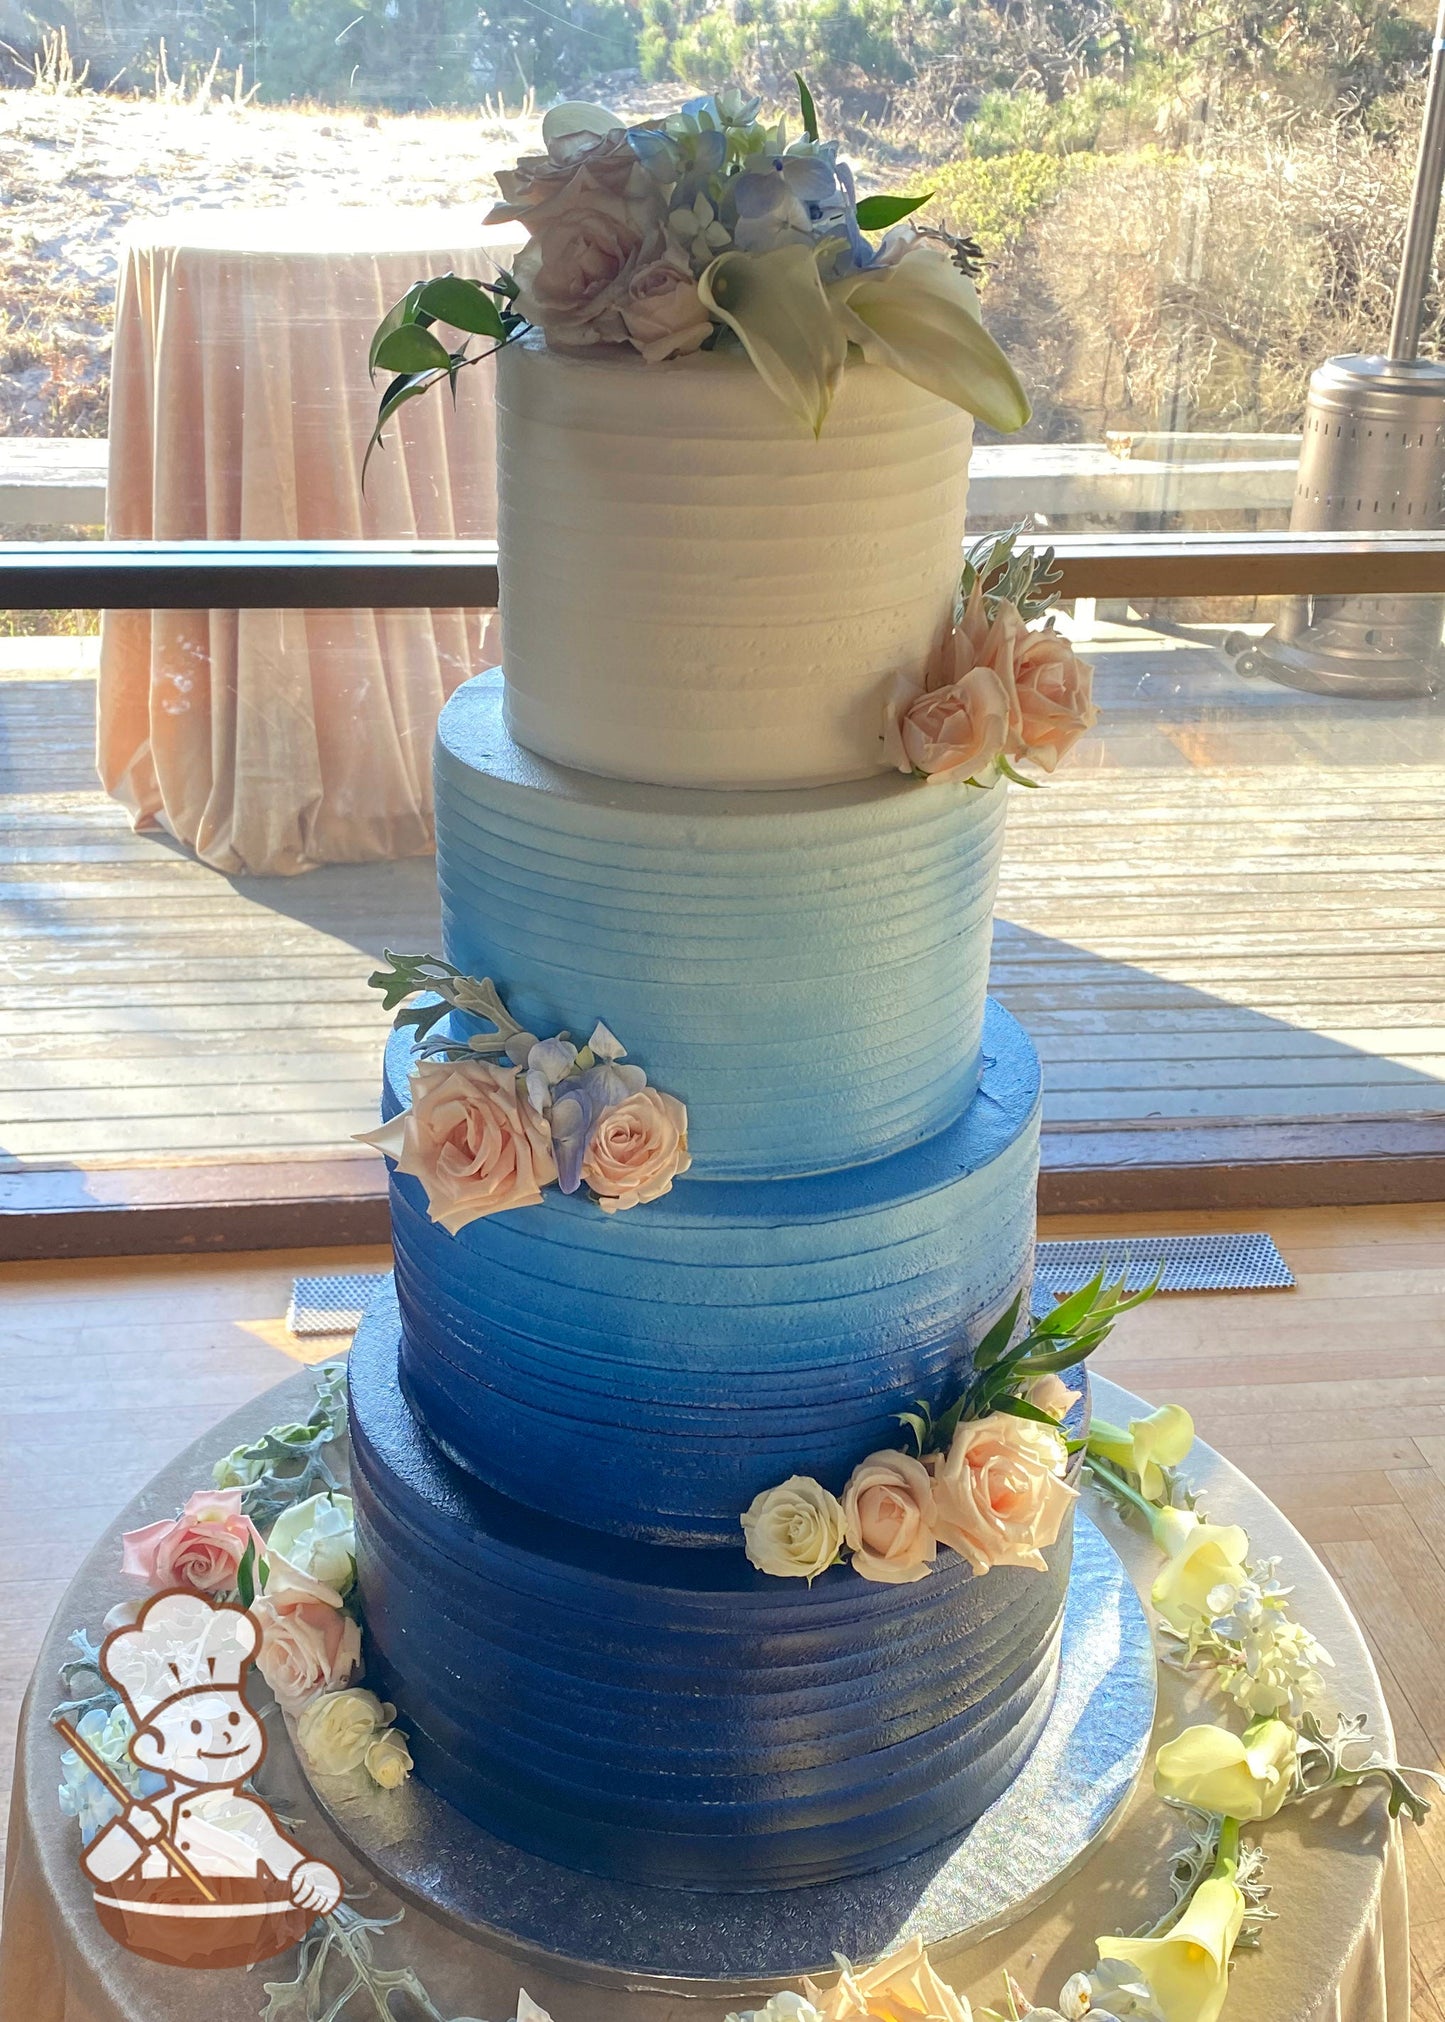 Cake with white icing decorated with a light horizontal texture and an airbrushed ombre coloring starting with dark-blue at bottom to white.